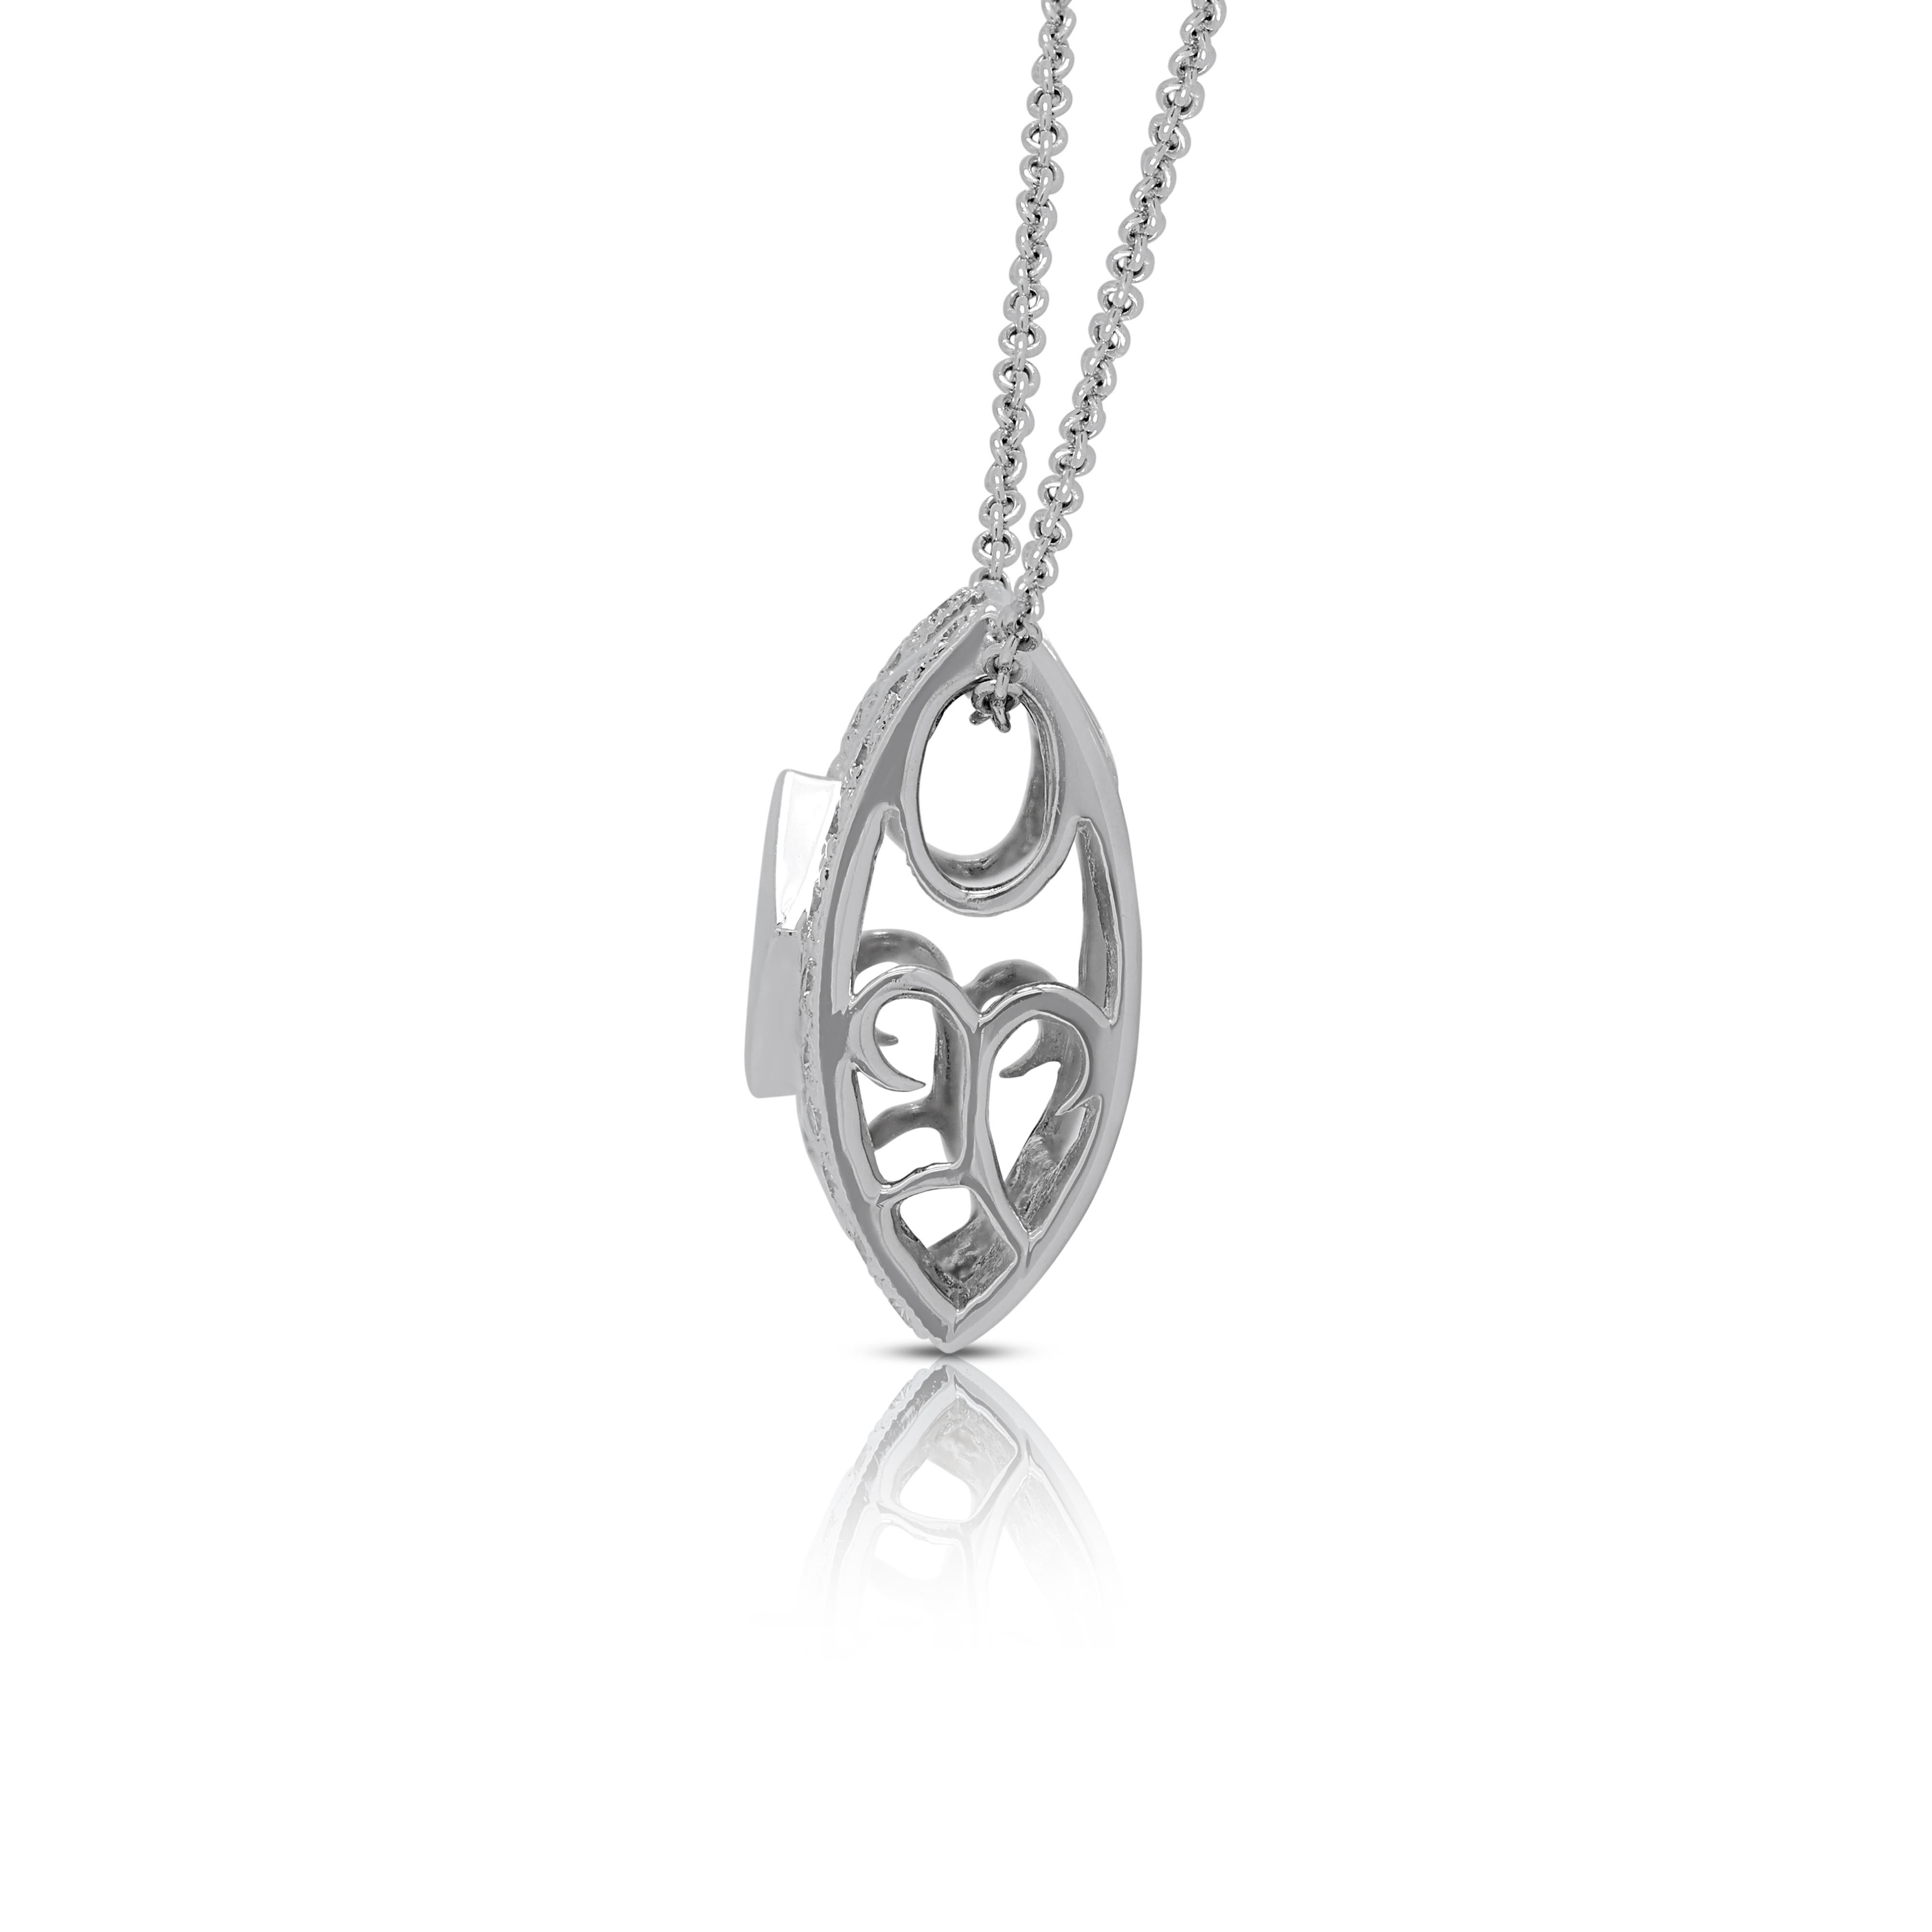 Luminous 0.30ct Diamonds Pendant in 18K White Gold - (Chain not Included) For Sale 1